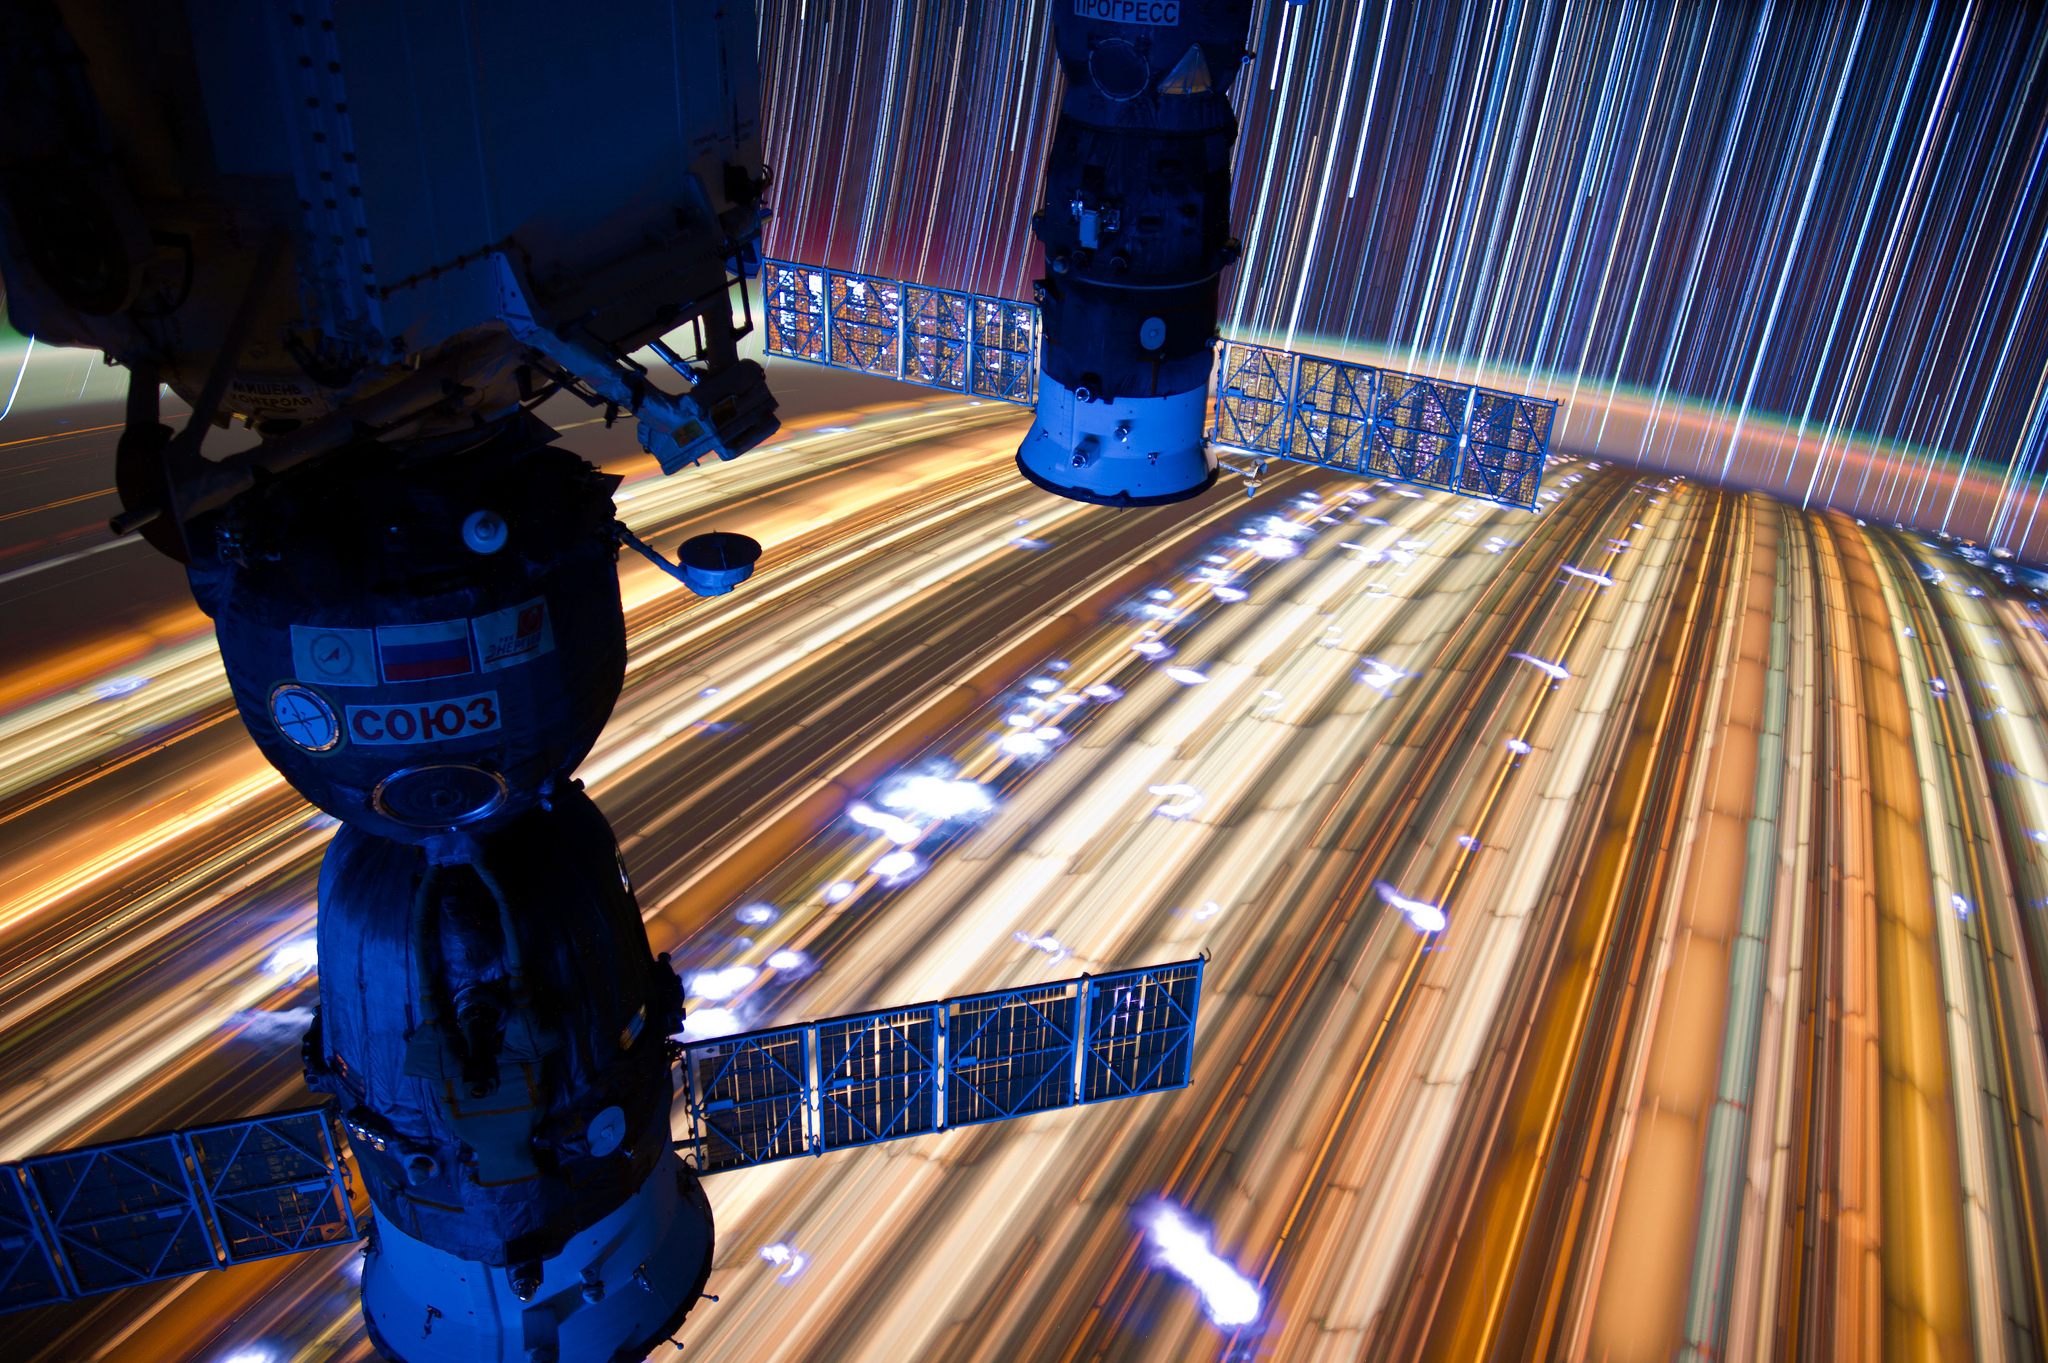 Time lapse photo from the ISS